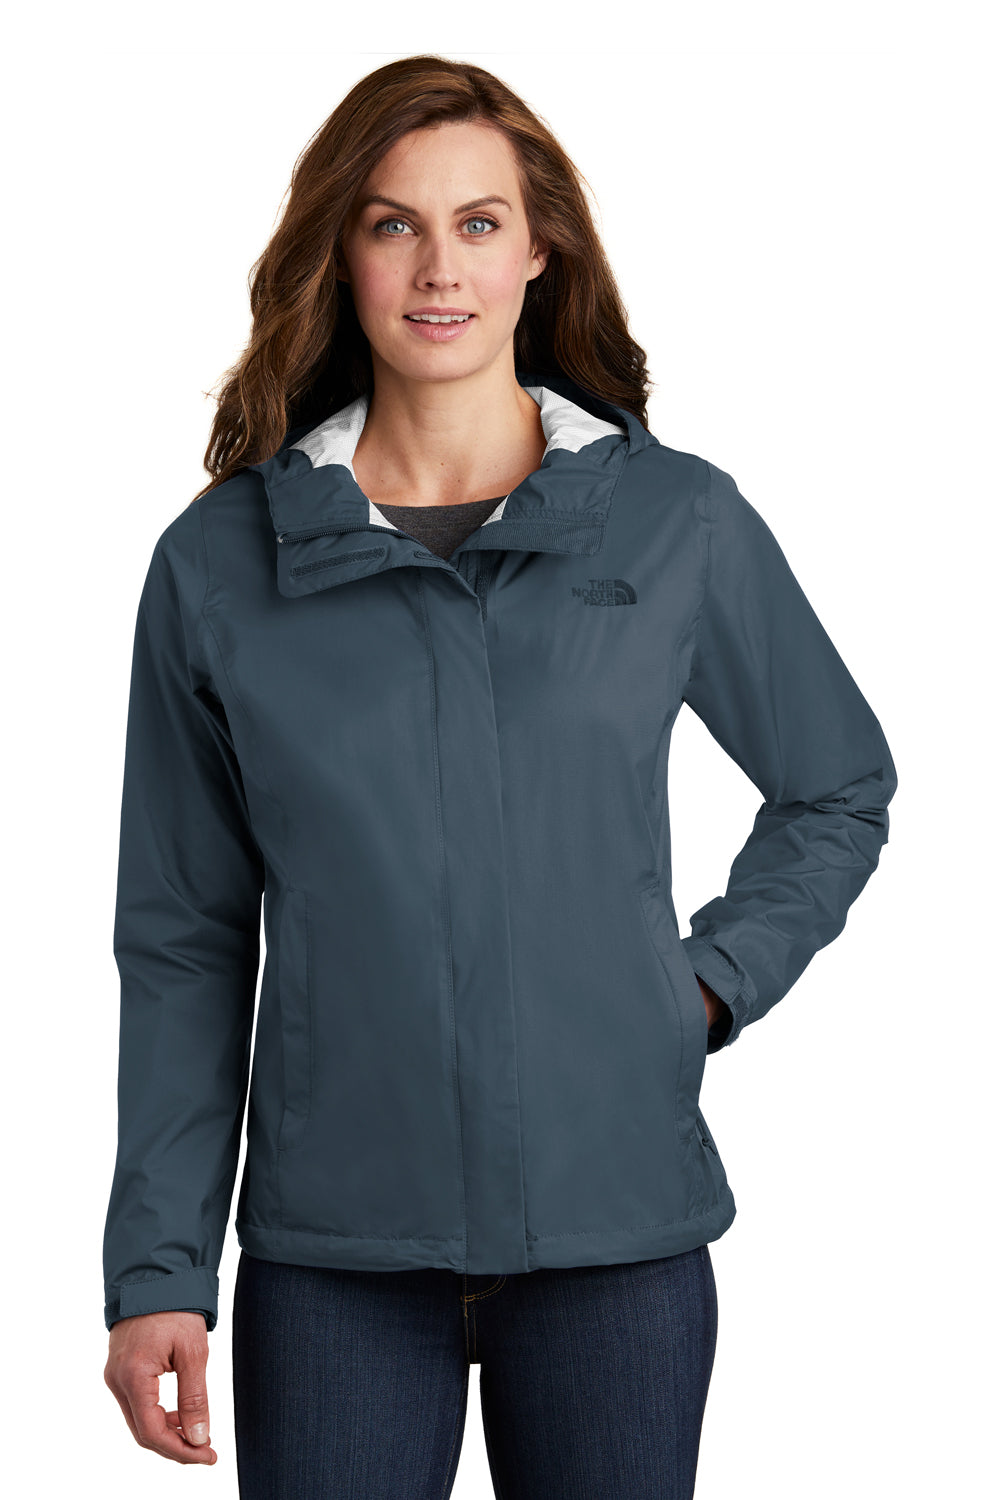 The North Face NF0A3LH5 Womens DryVent Waterproof Full Zip Hooded Jacket Shady Blue Front